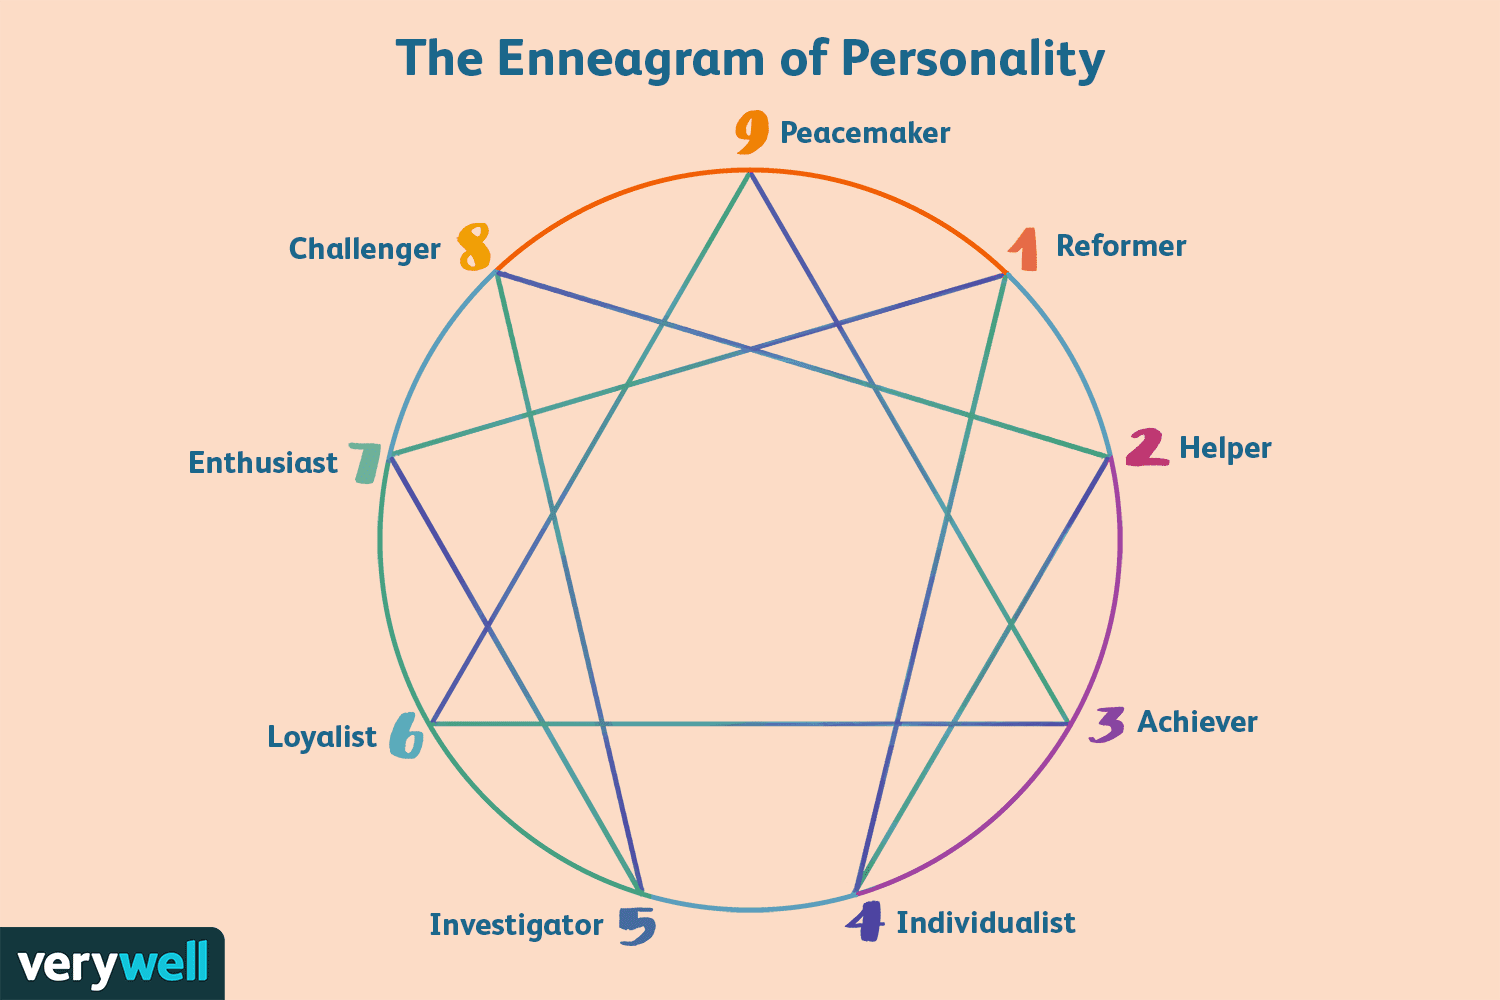 What the Enneagram Types Say About Your Personality